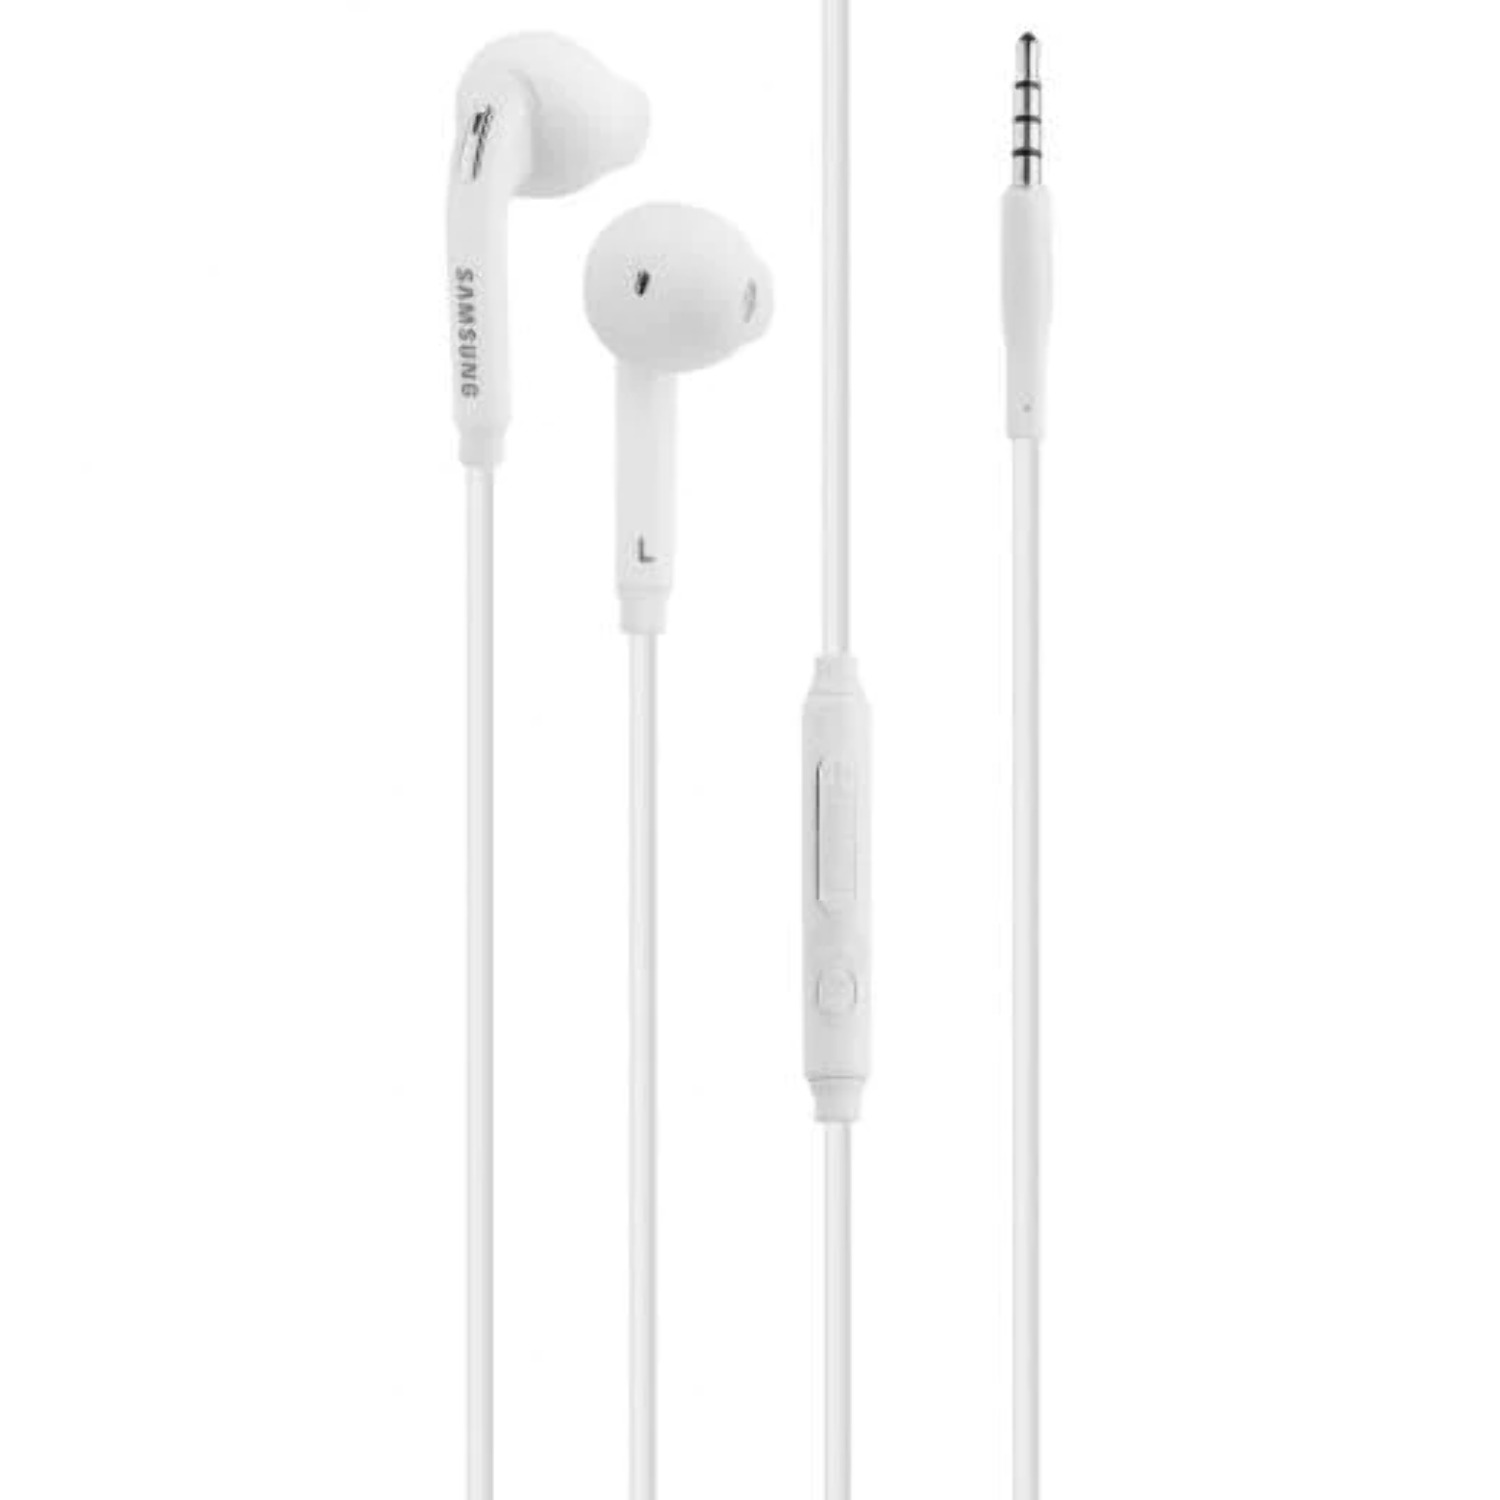 Premium Wired Headset 3.5mm Earbud Stereo In-Ear Headphones with in-line Remote & Microphone Compatible with Samsung Galaxy A7 (2015) - image 1 of 1